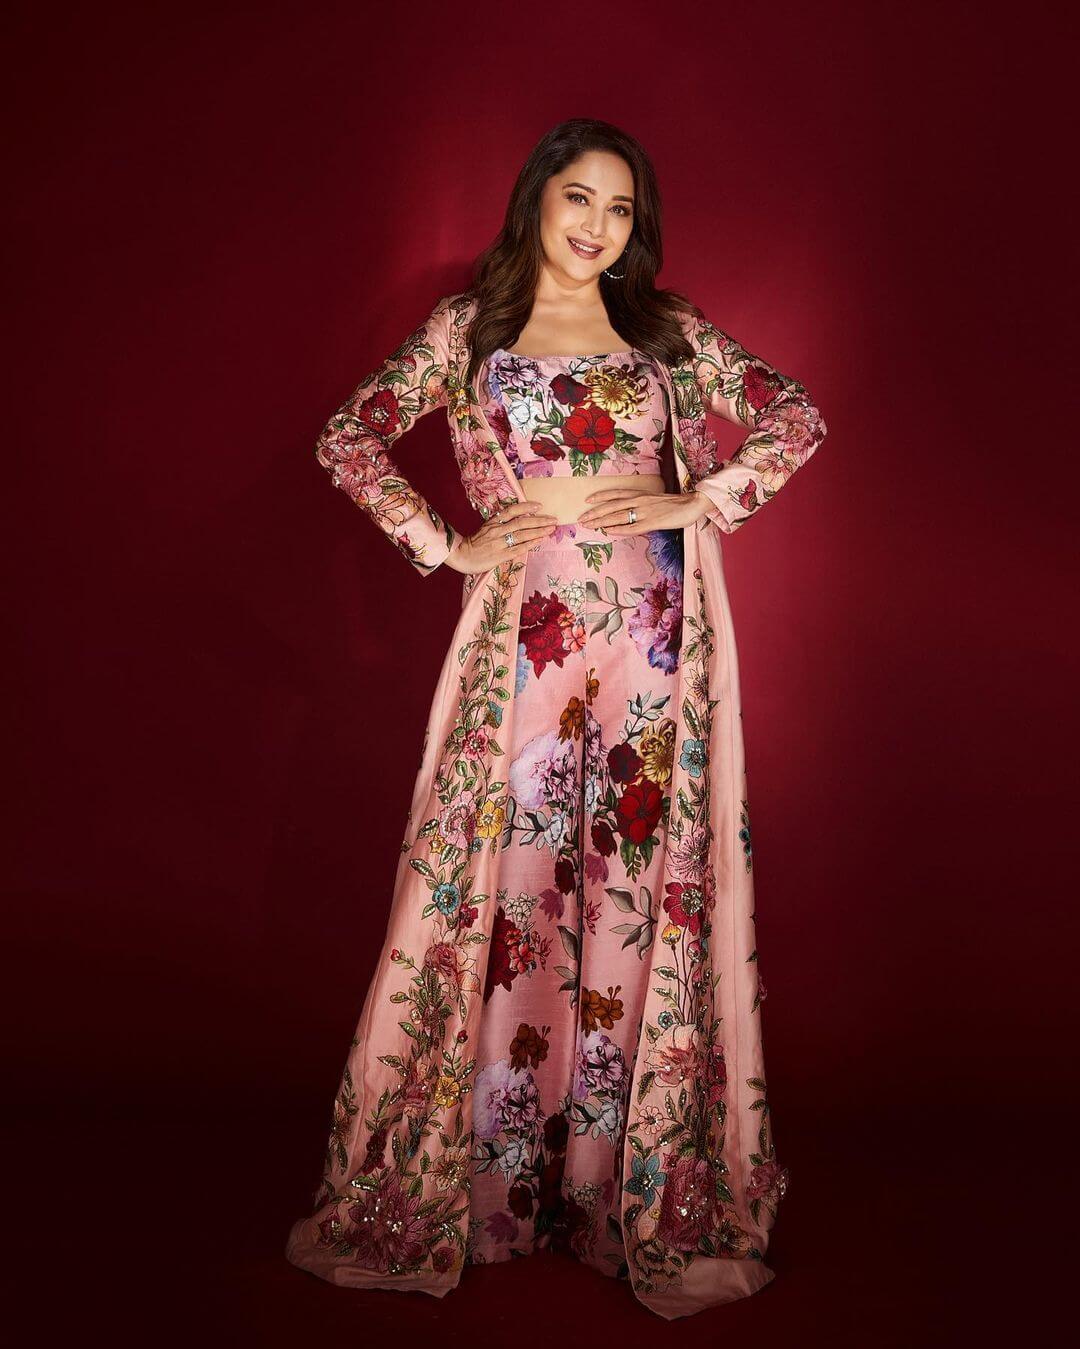 Madhuri Dixit Looks Fabulous in a Floral Co-ord Set